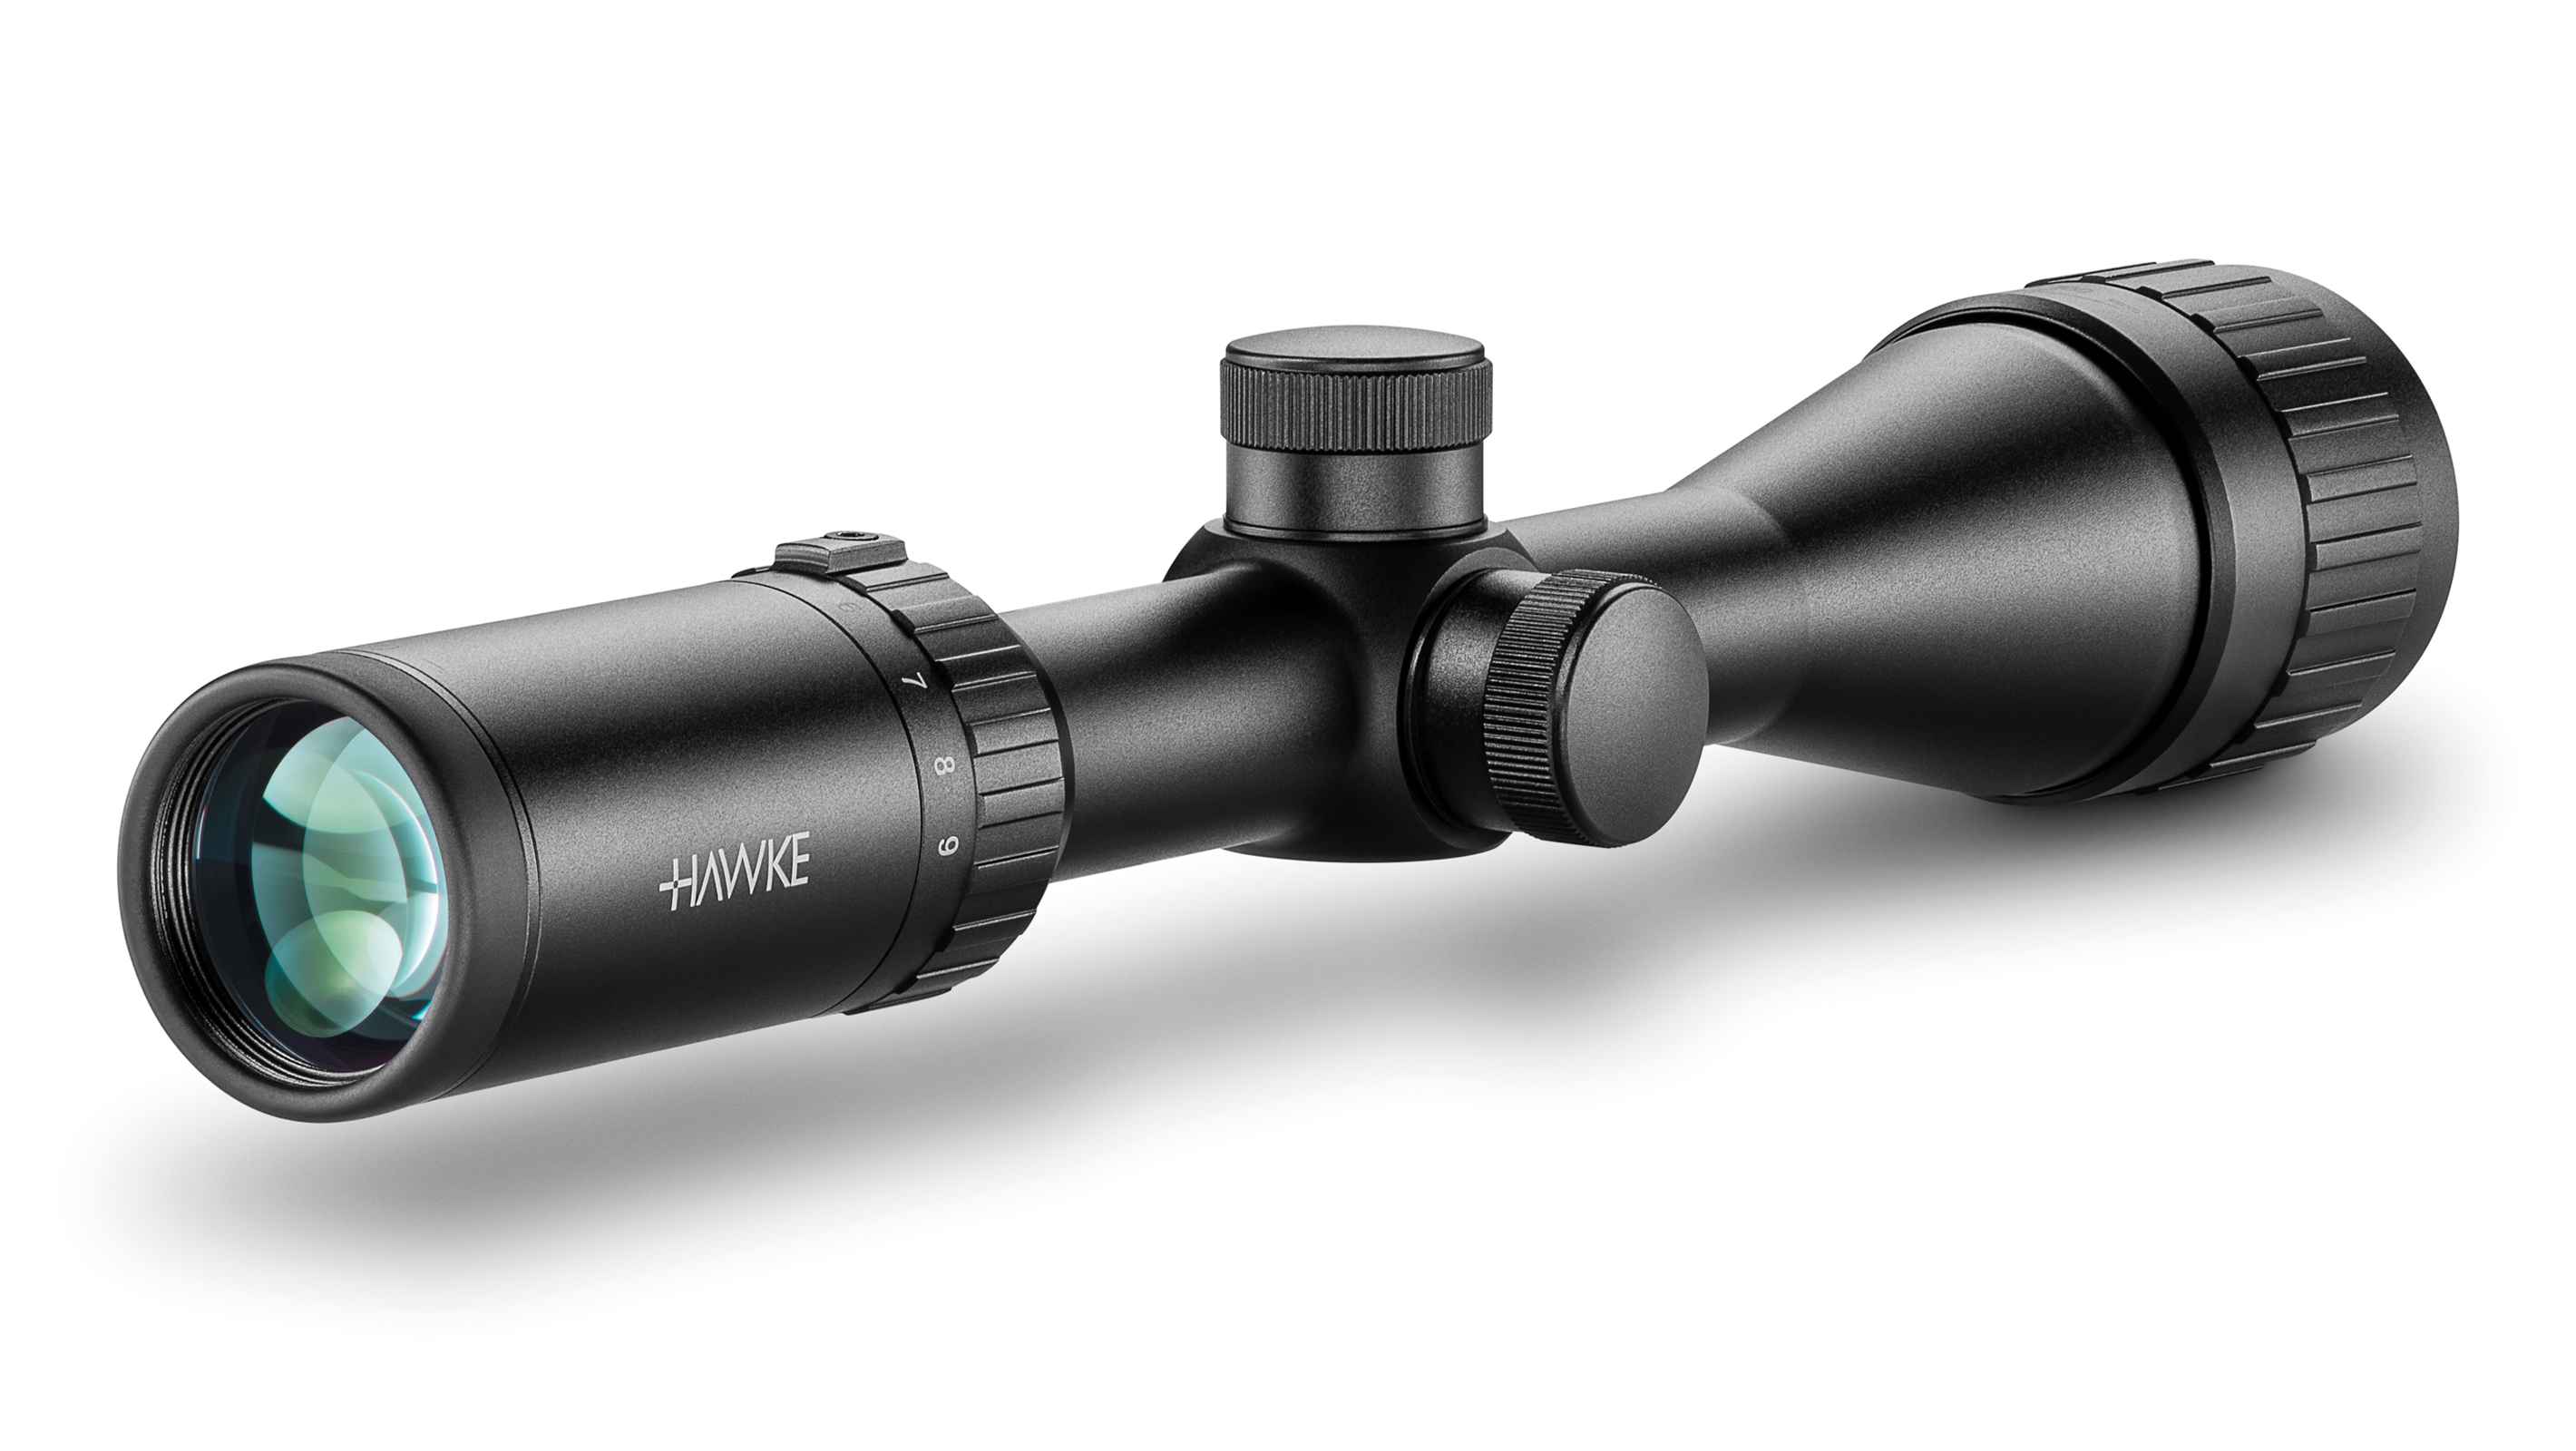 Ocular End View Of The Hawke Vantage 3-9x40 AO Mil Dot Rifle Scope